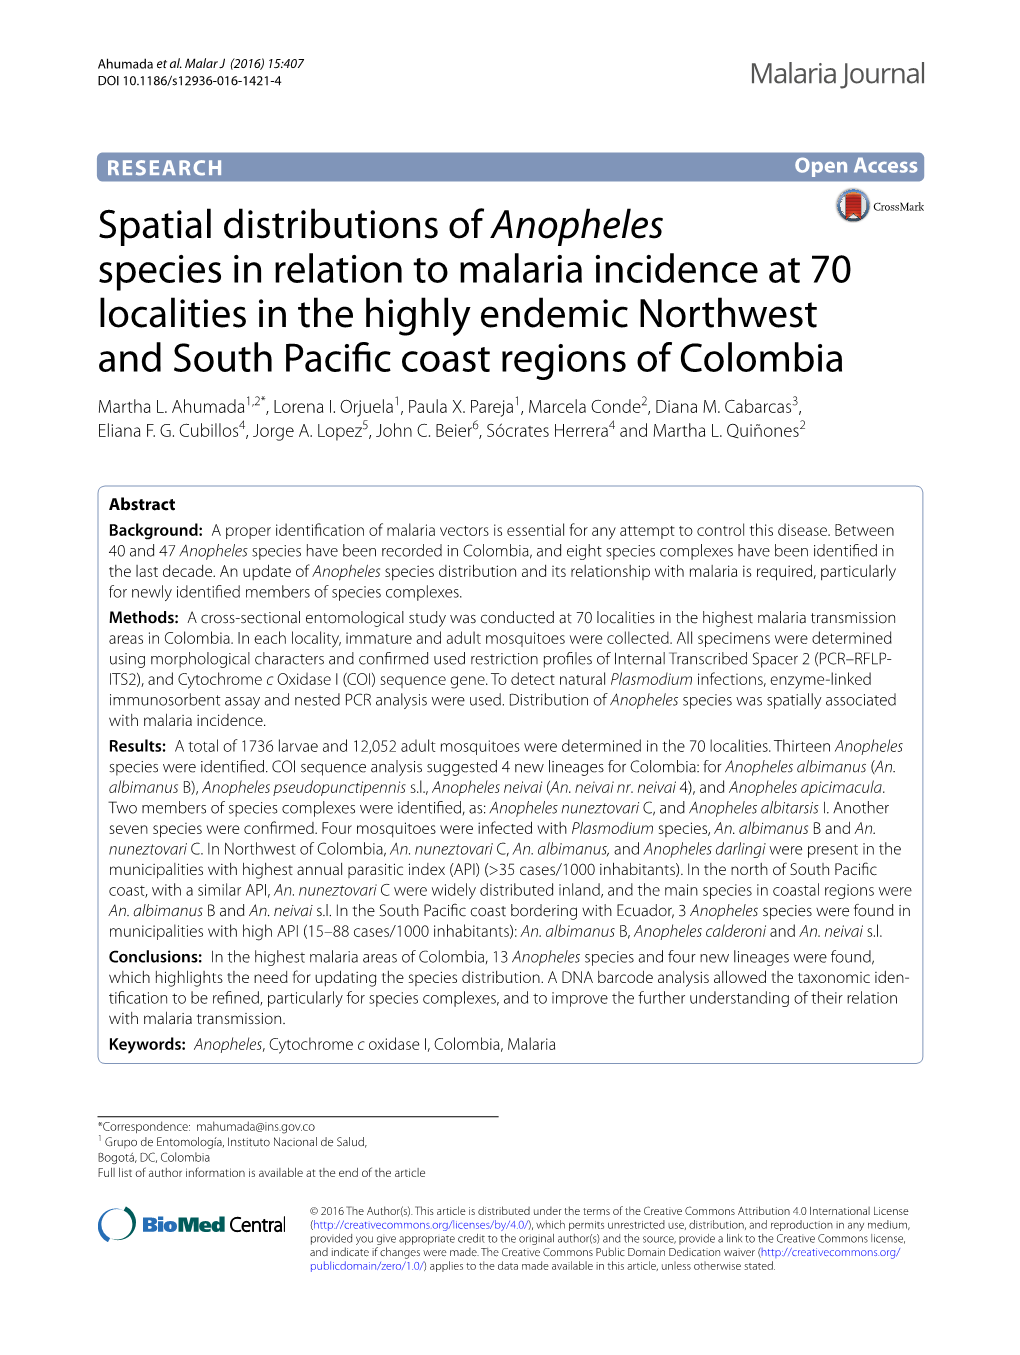 Spatial Distributions of Anopheles Species in Relation to Malaria